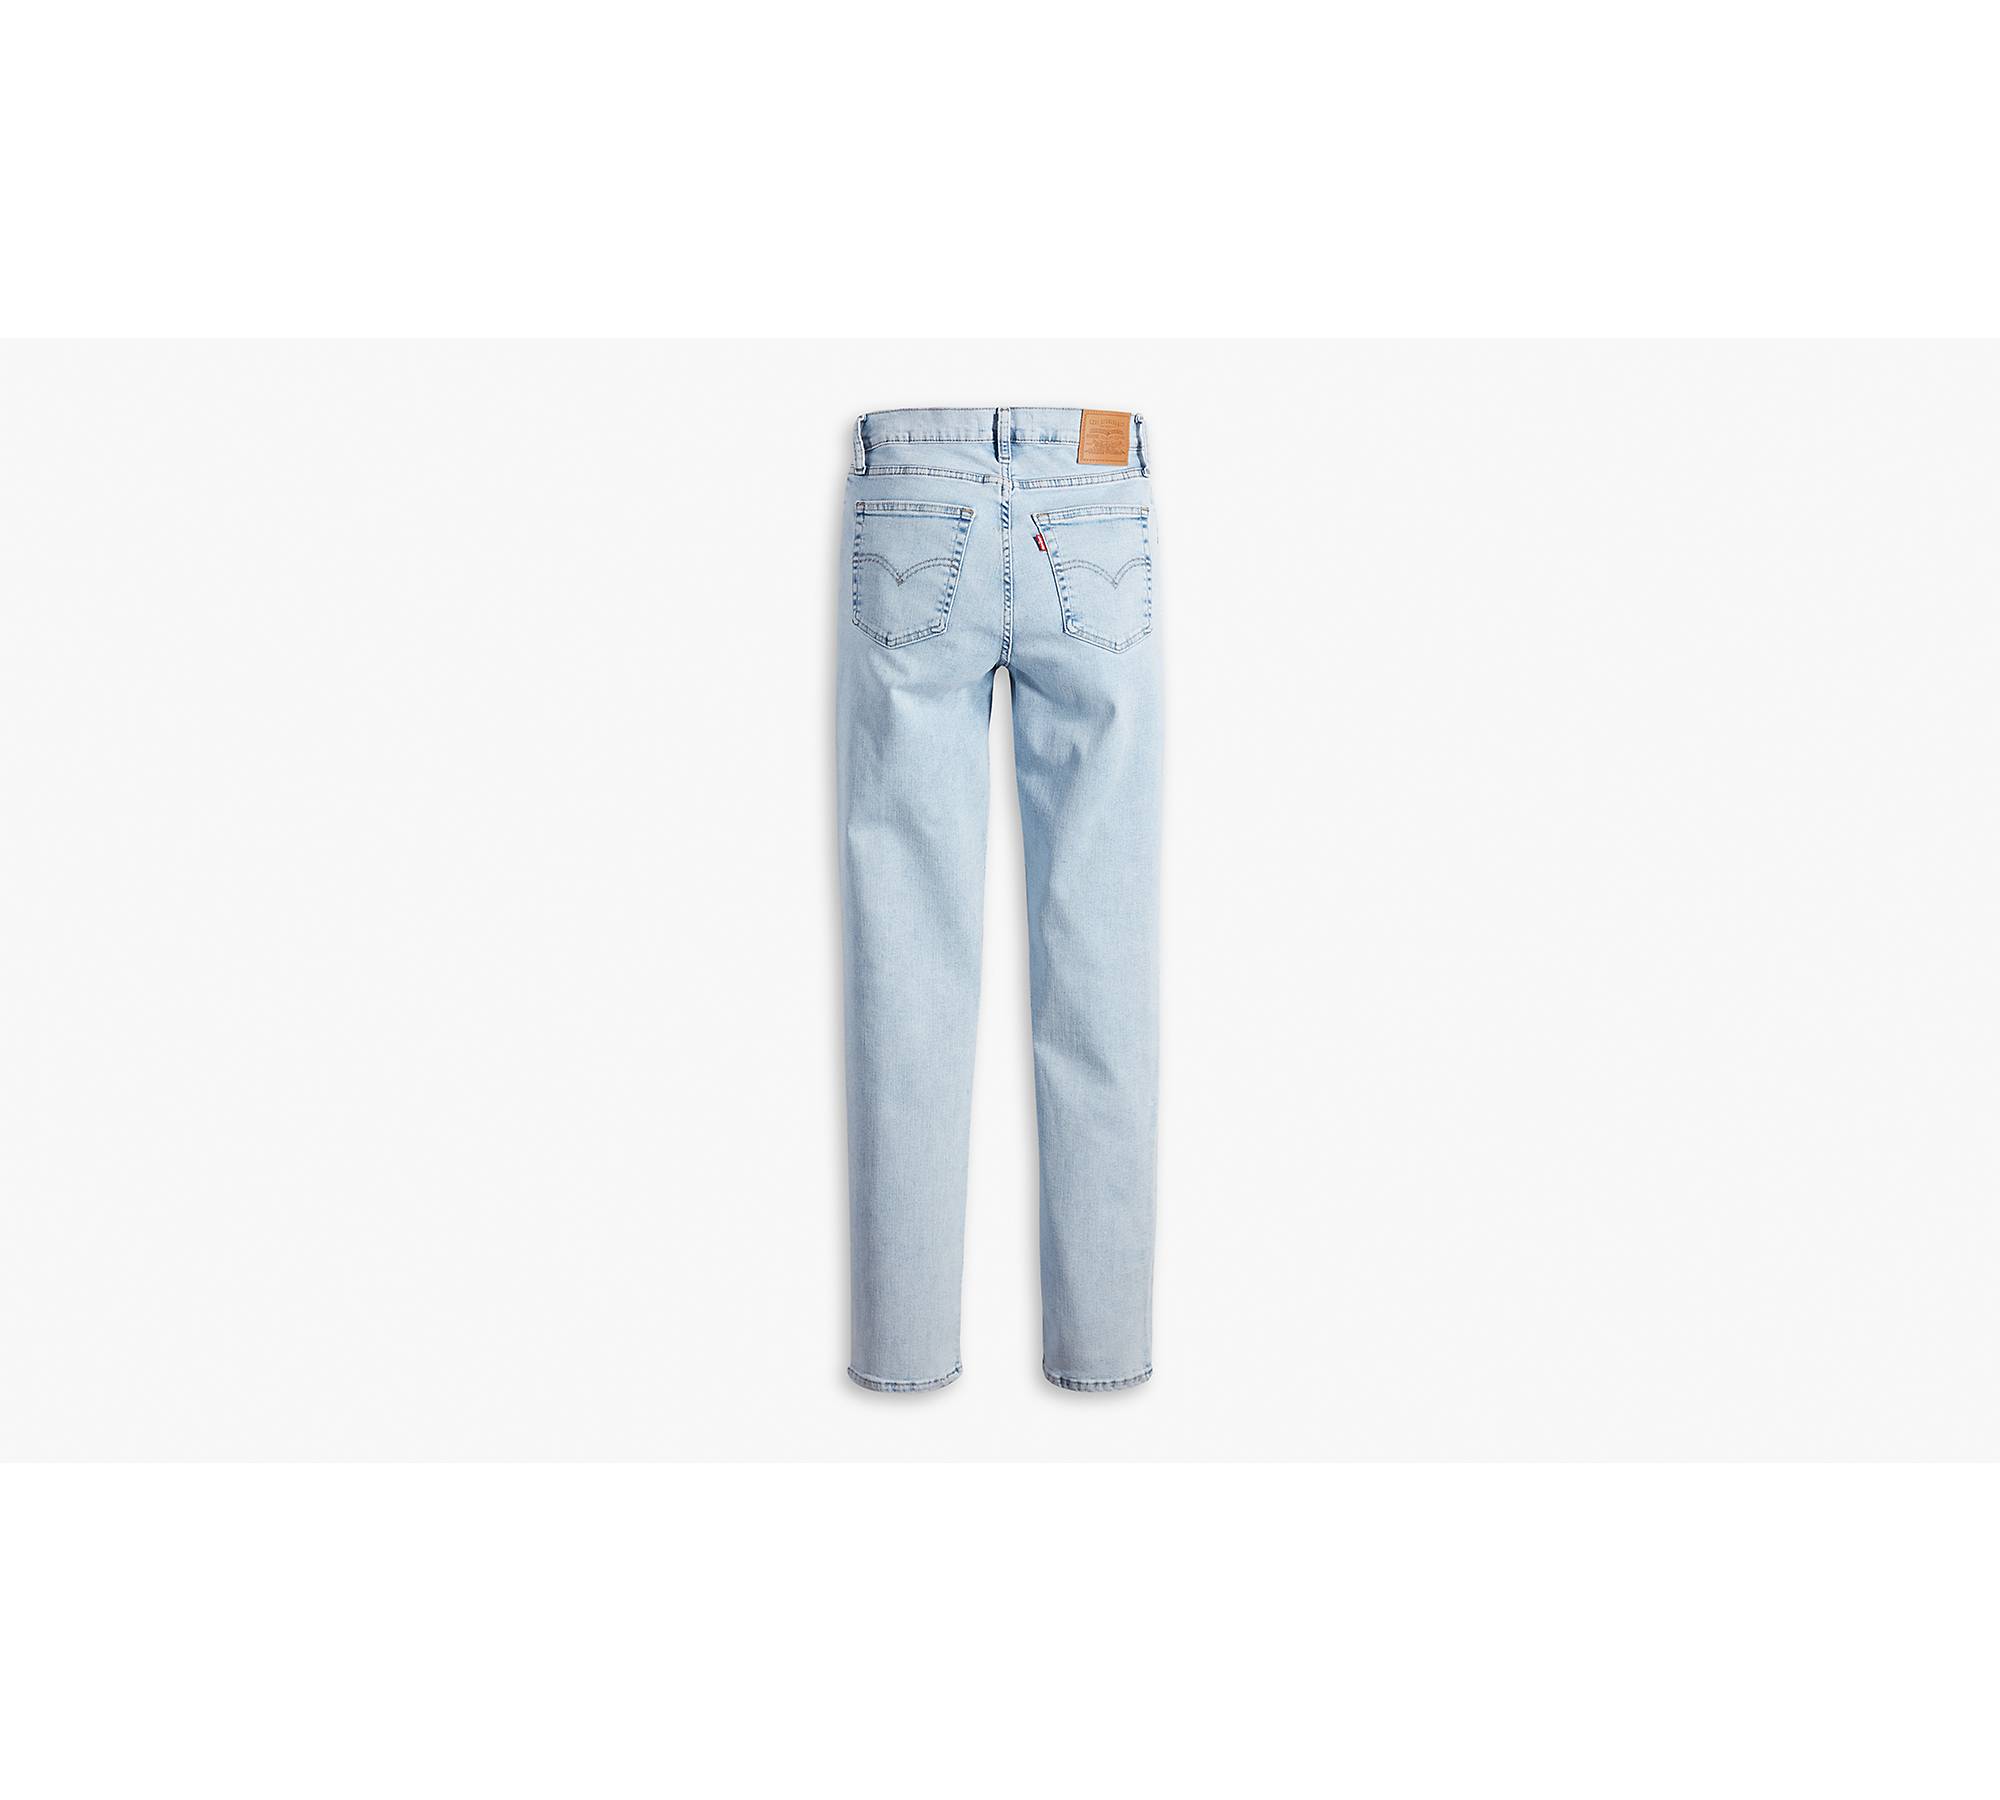 Levi's 724 high rise ripped straight jean in light wash